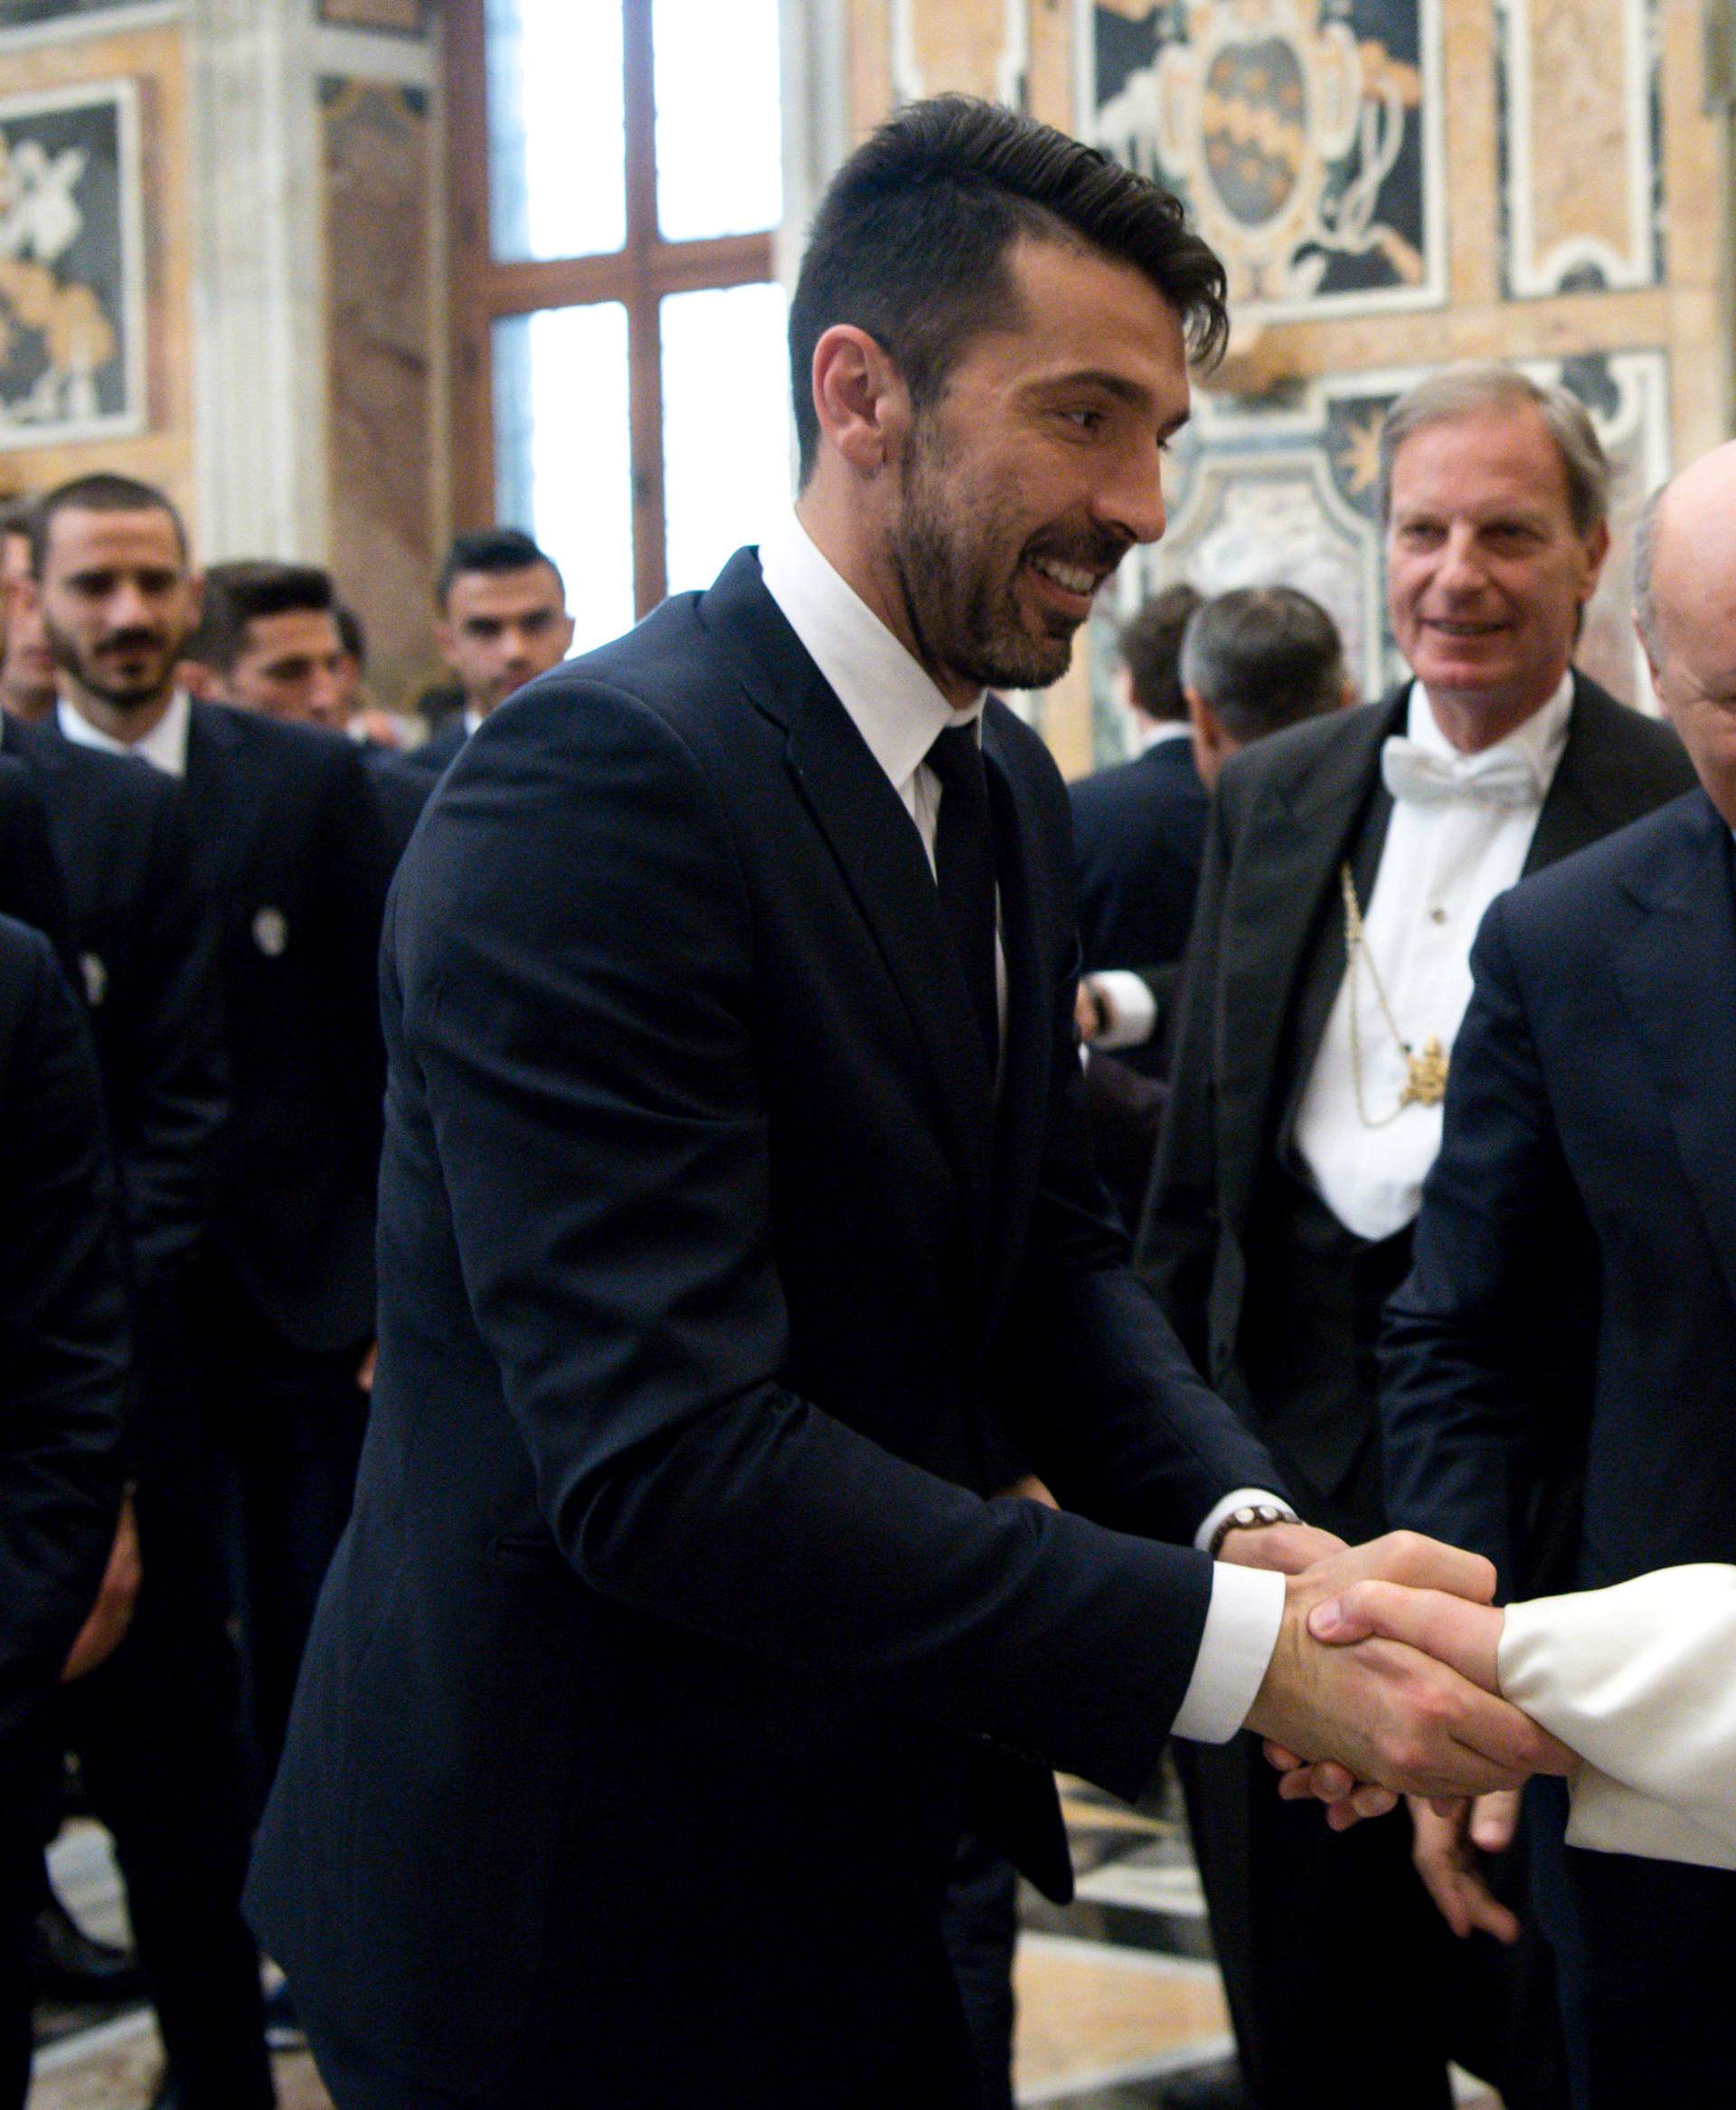 Juventus goalkeeper Gianluigi Buffon shakes hands with Pope Francis during a private audience at the Vatican